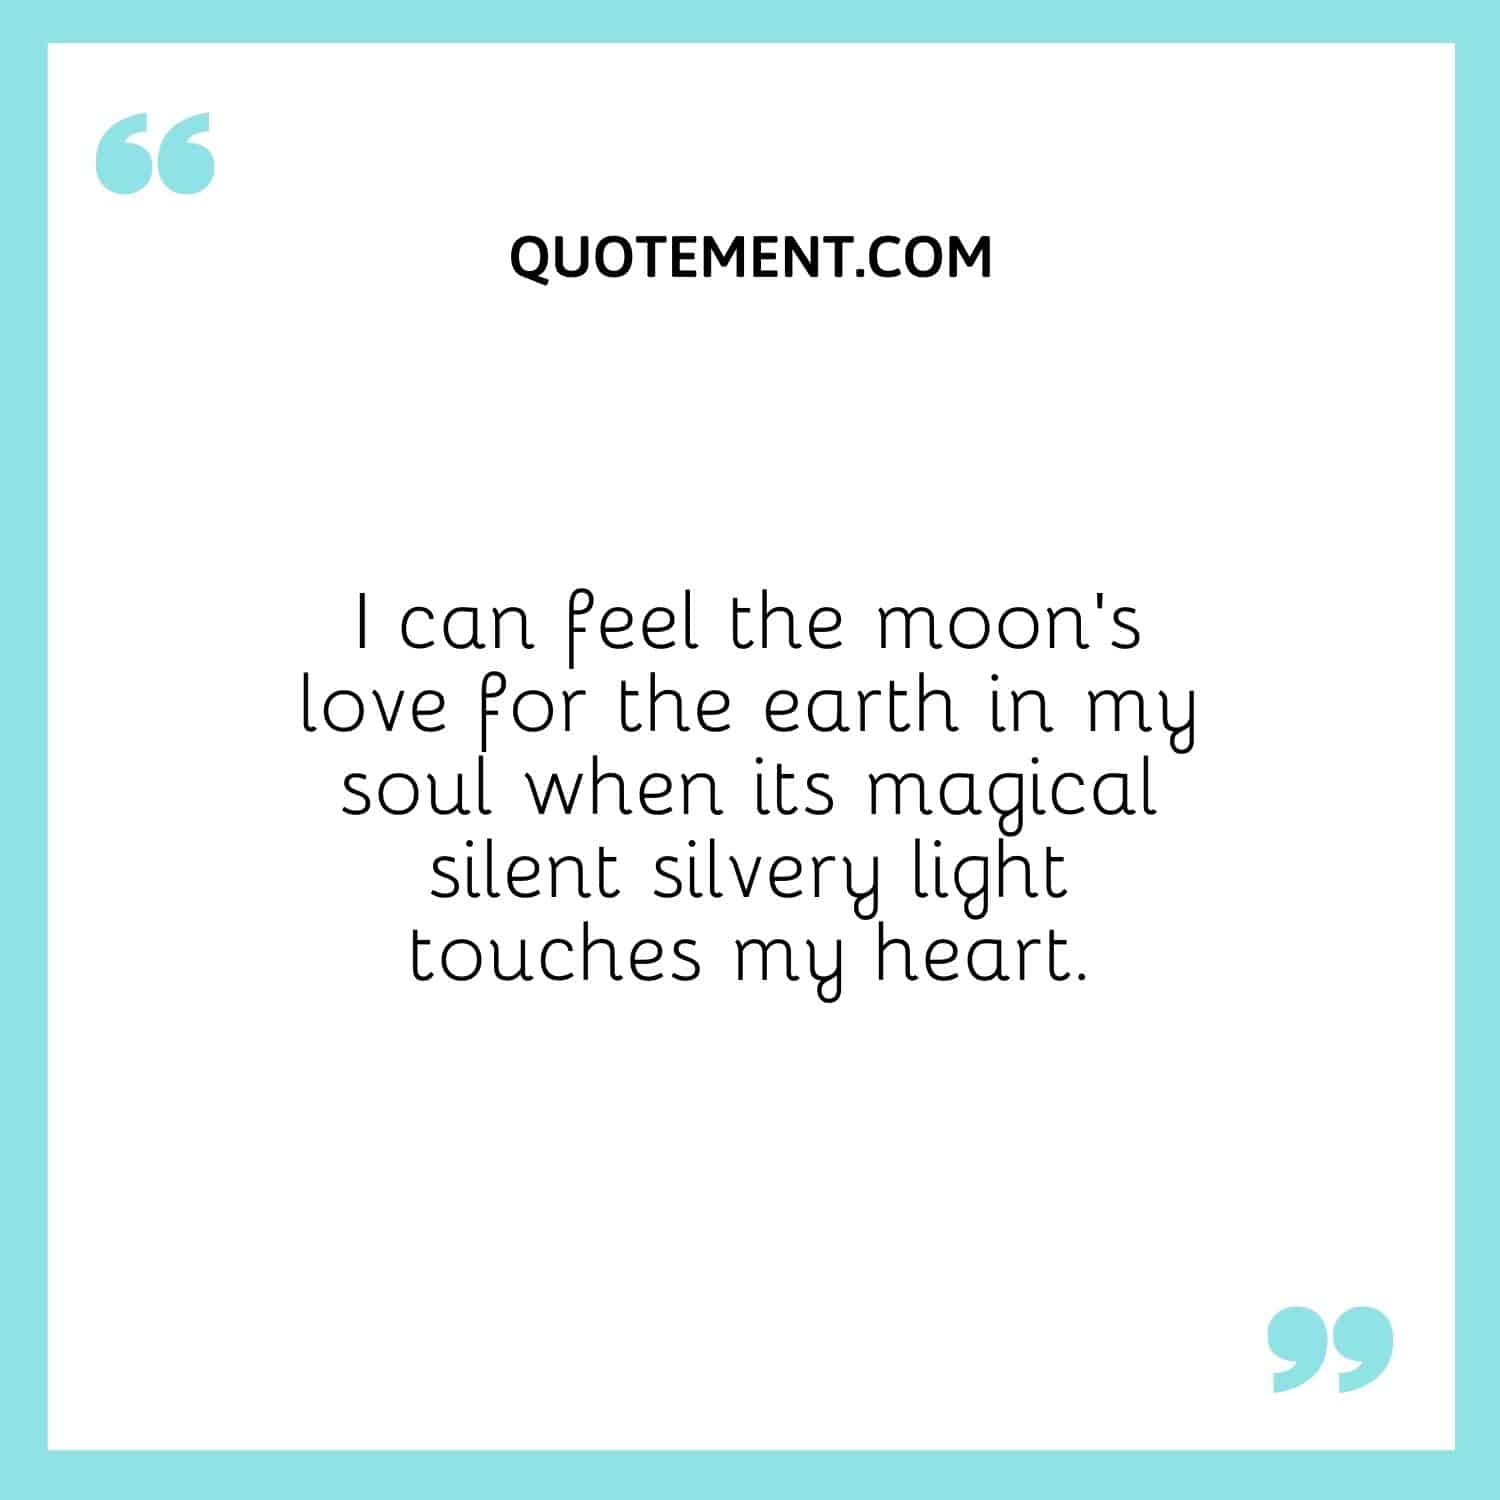 I can feel the moon’s love for the earth in my soul when its magical silent silvery light touches my heart.